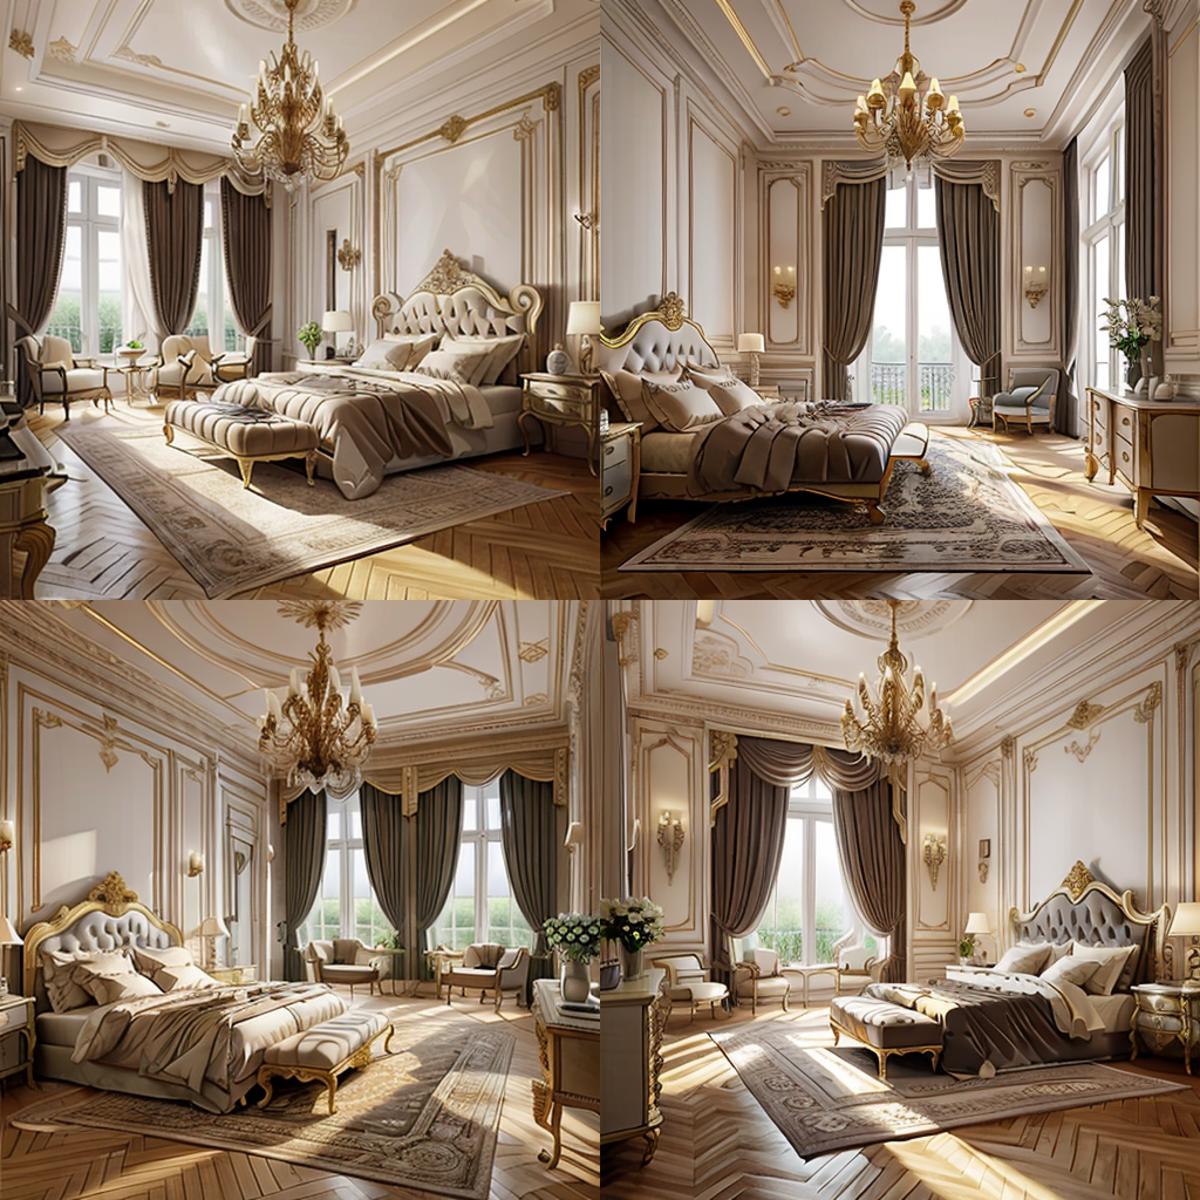 Neoclassical bedroom image by ArchitectureAI